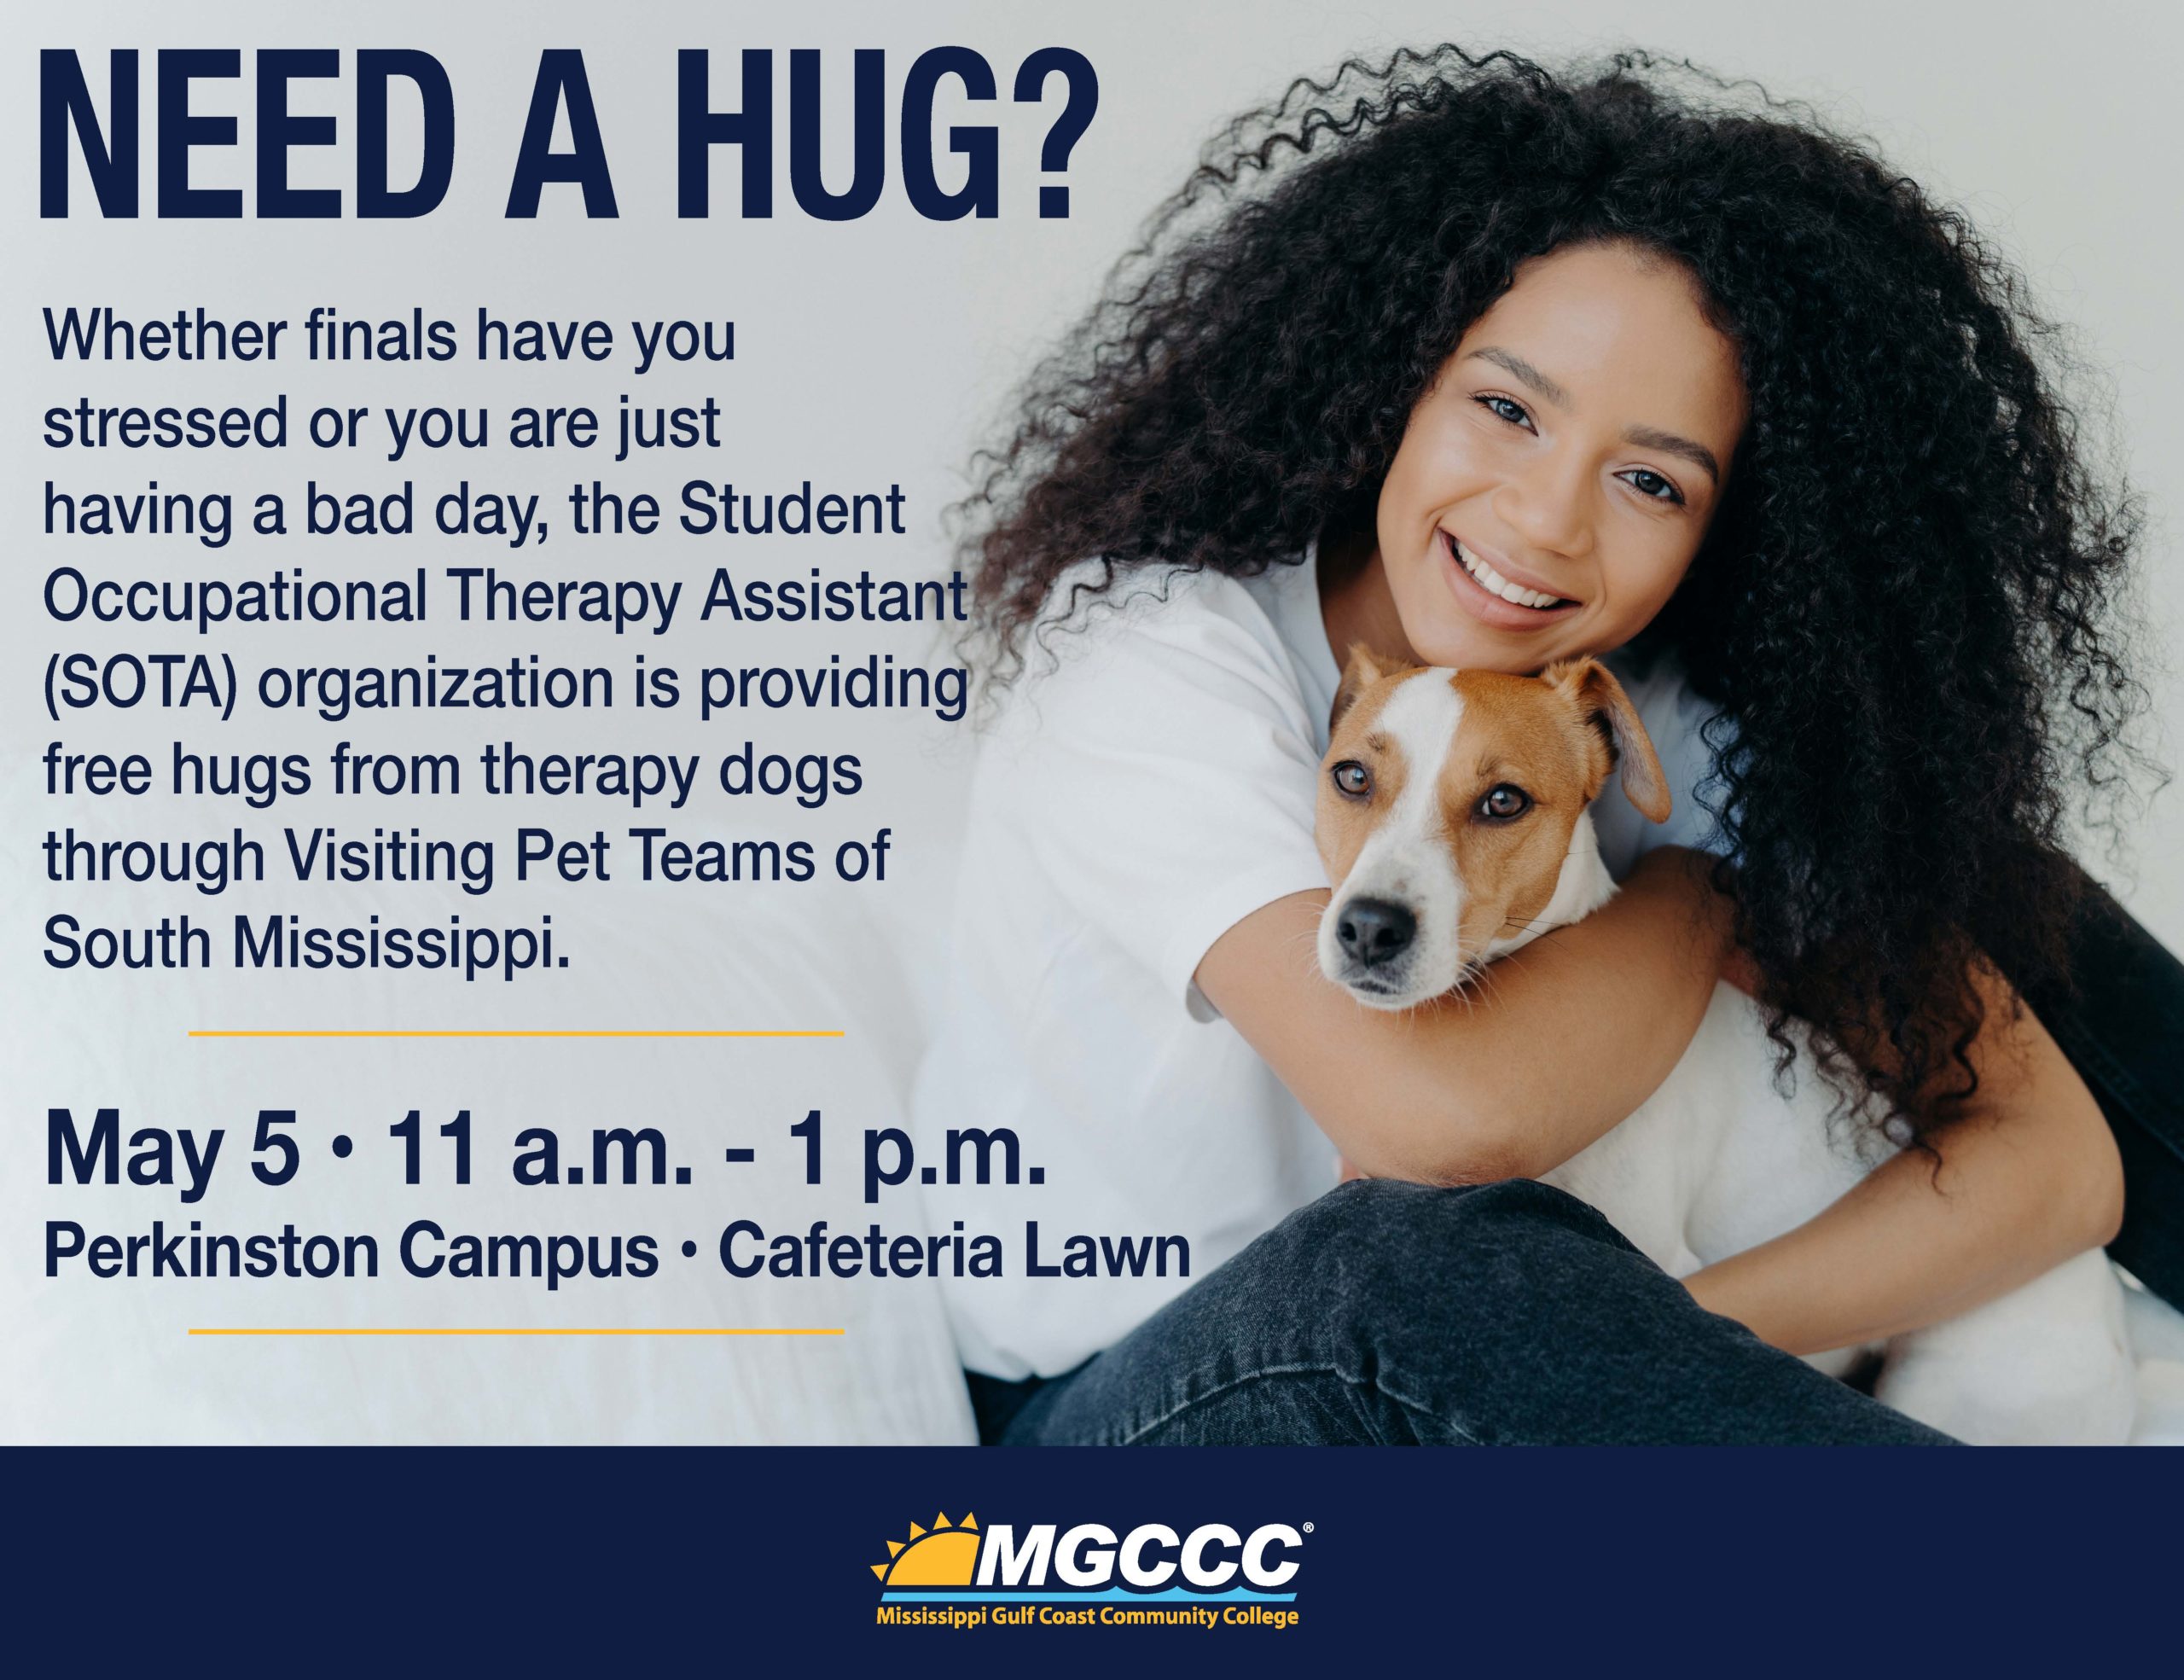 MGCCC organization provides puppy love to help students and faculty survive finals week